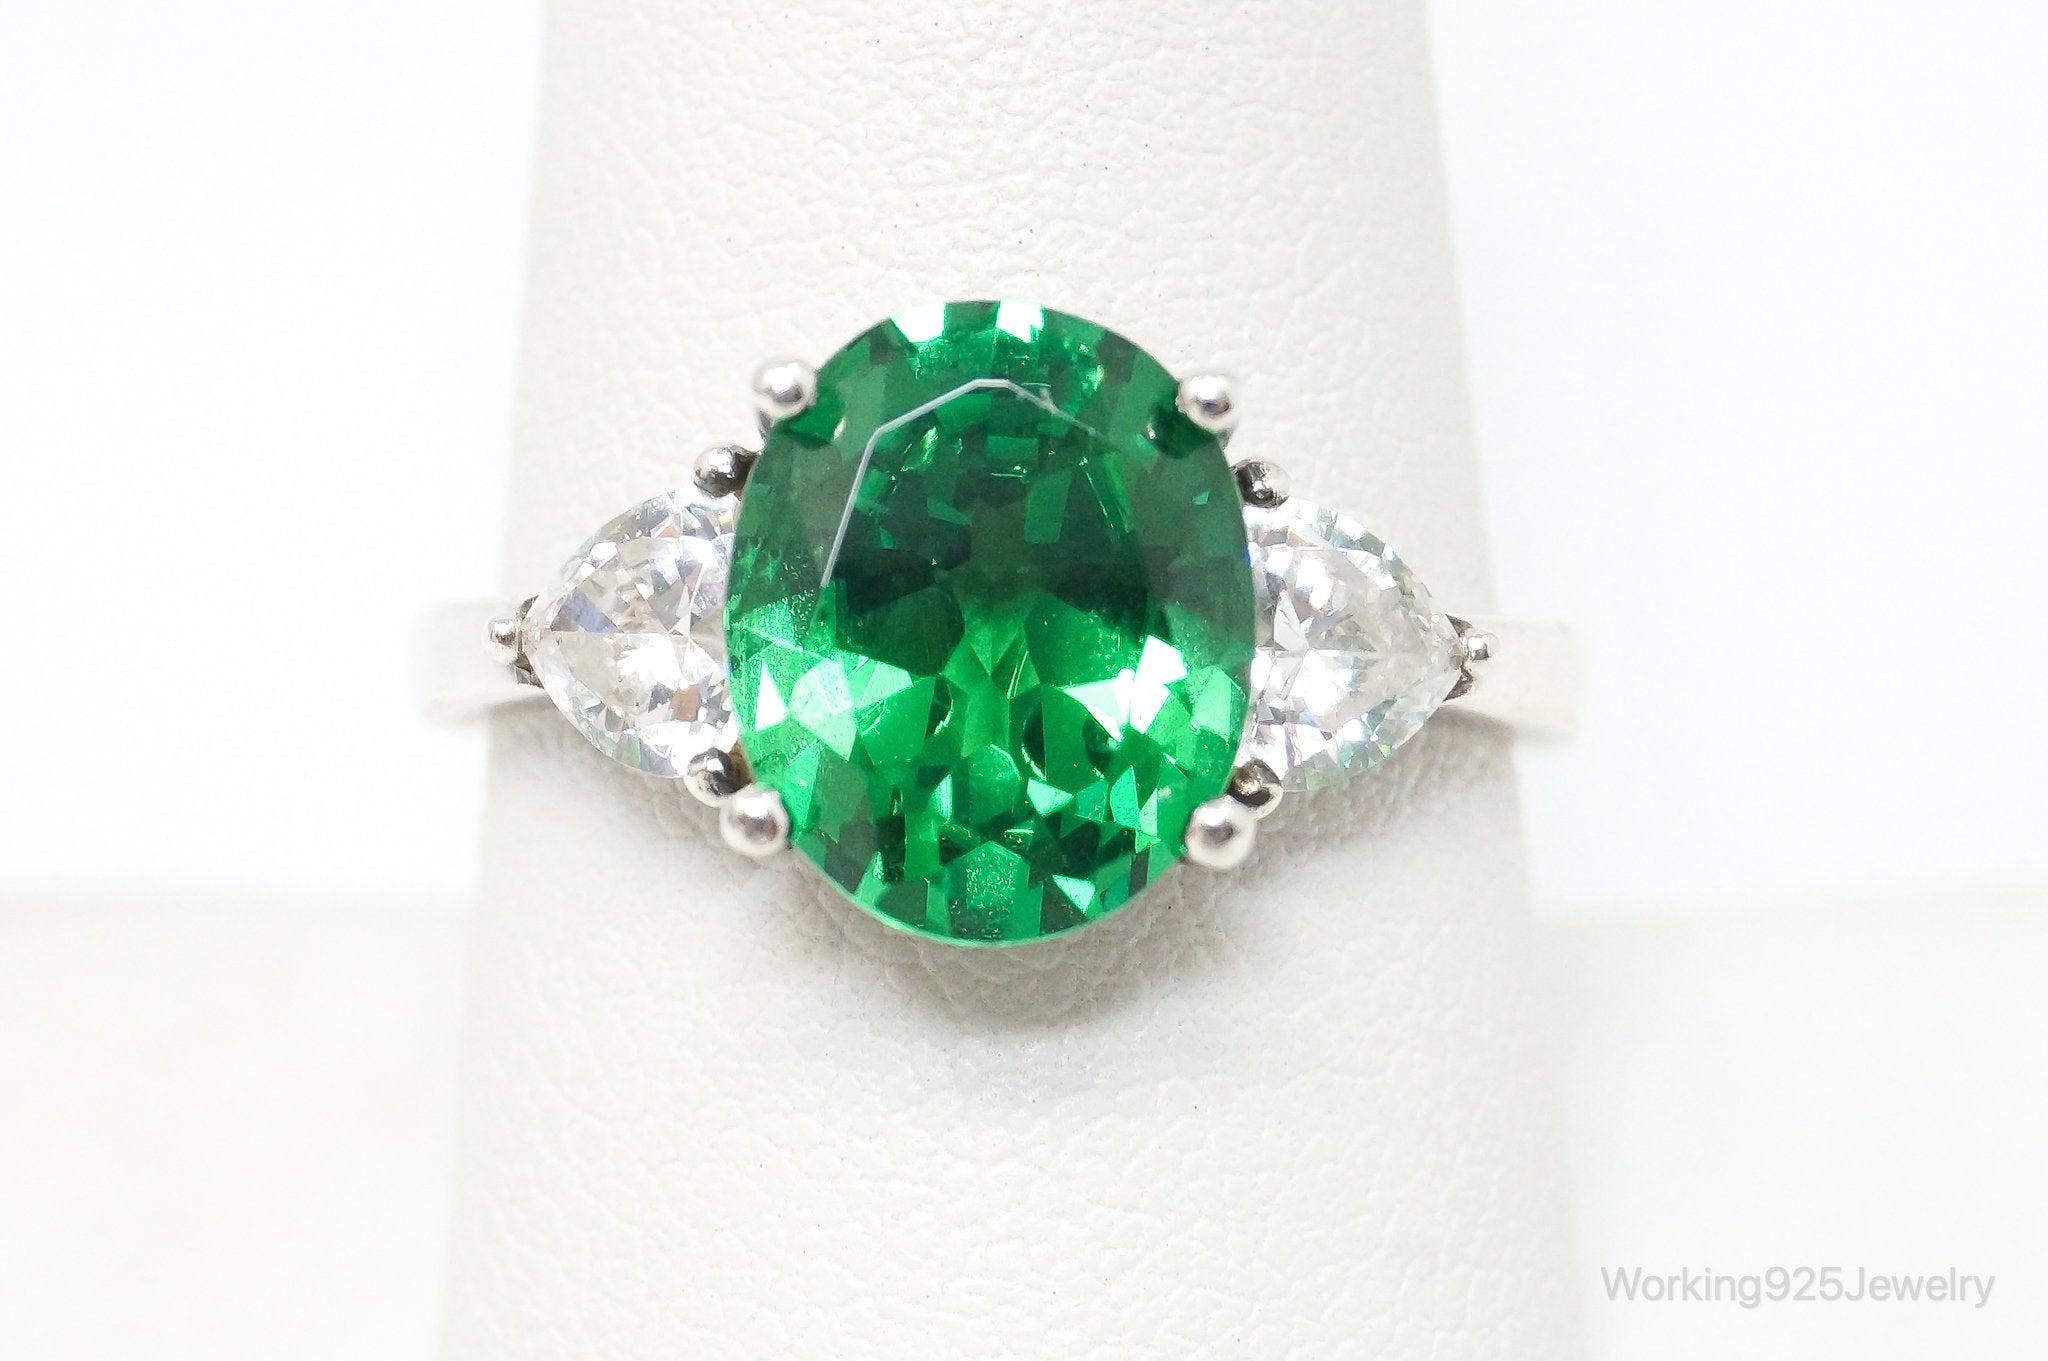 Vintage Simulated Emerald DQCZ Accented Sterling Silver Ring SZ 8.5